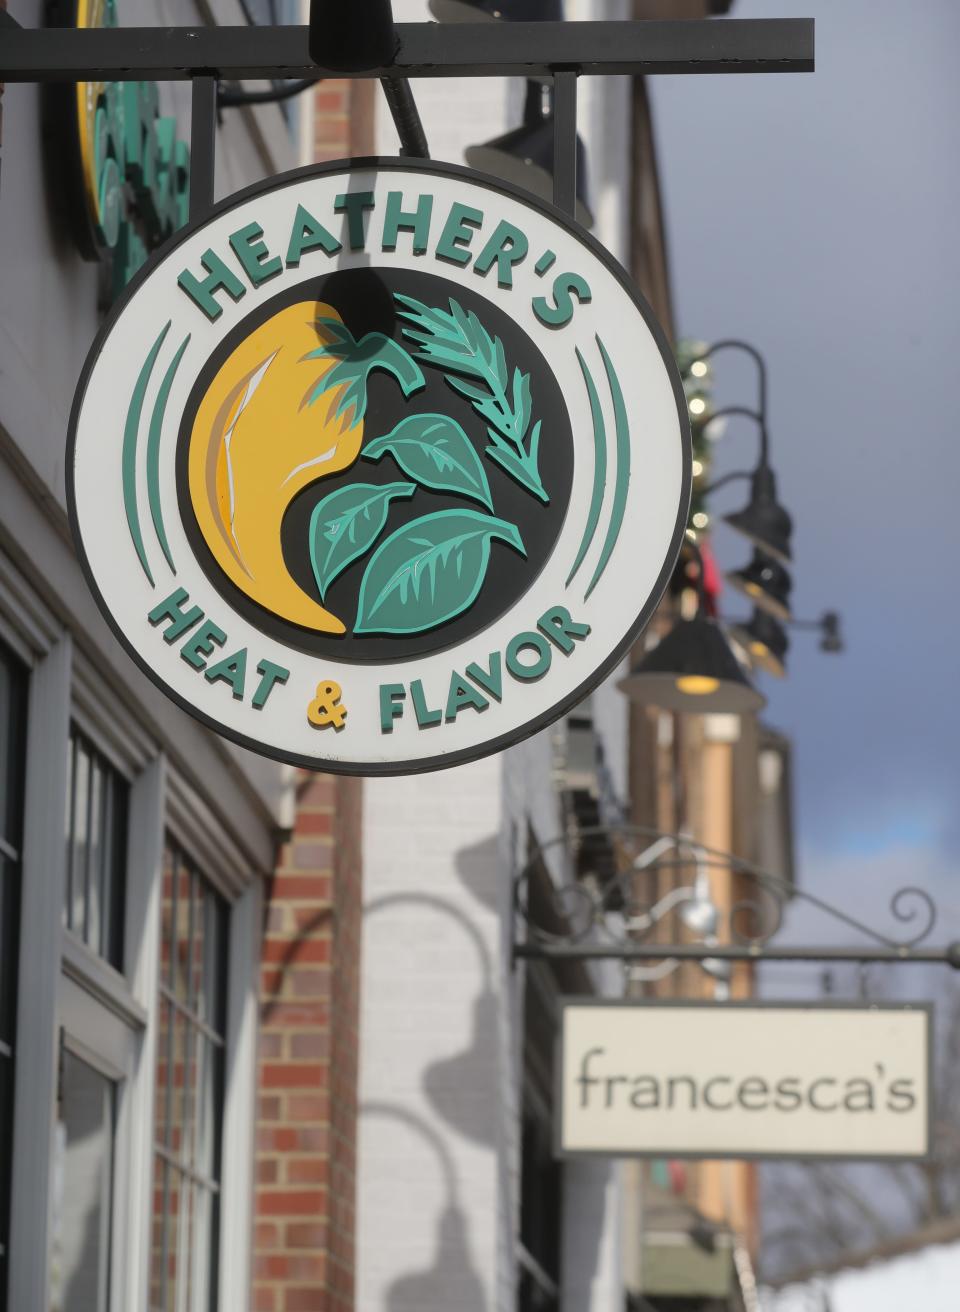 Heather's Heat and Flavor shop in Hudson's First & Main stocks a variety of herbs, spices, sauces and more.